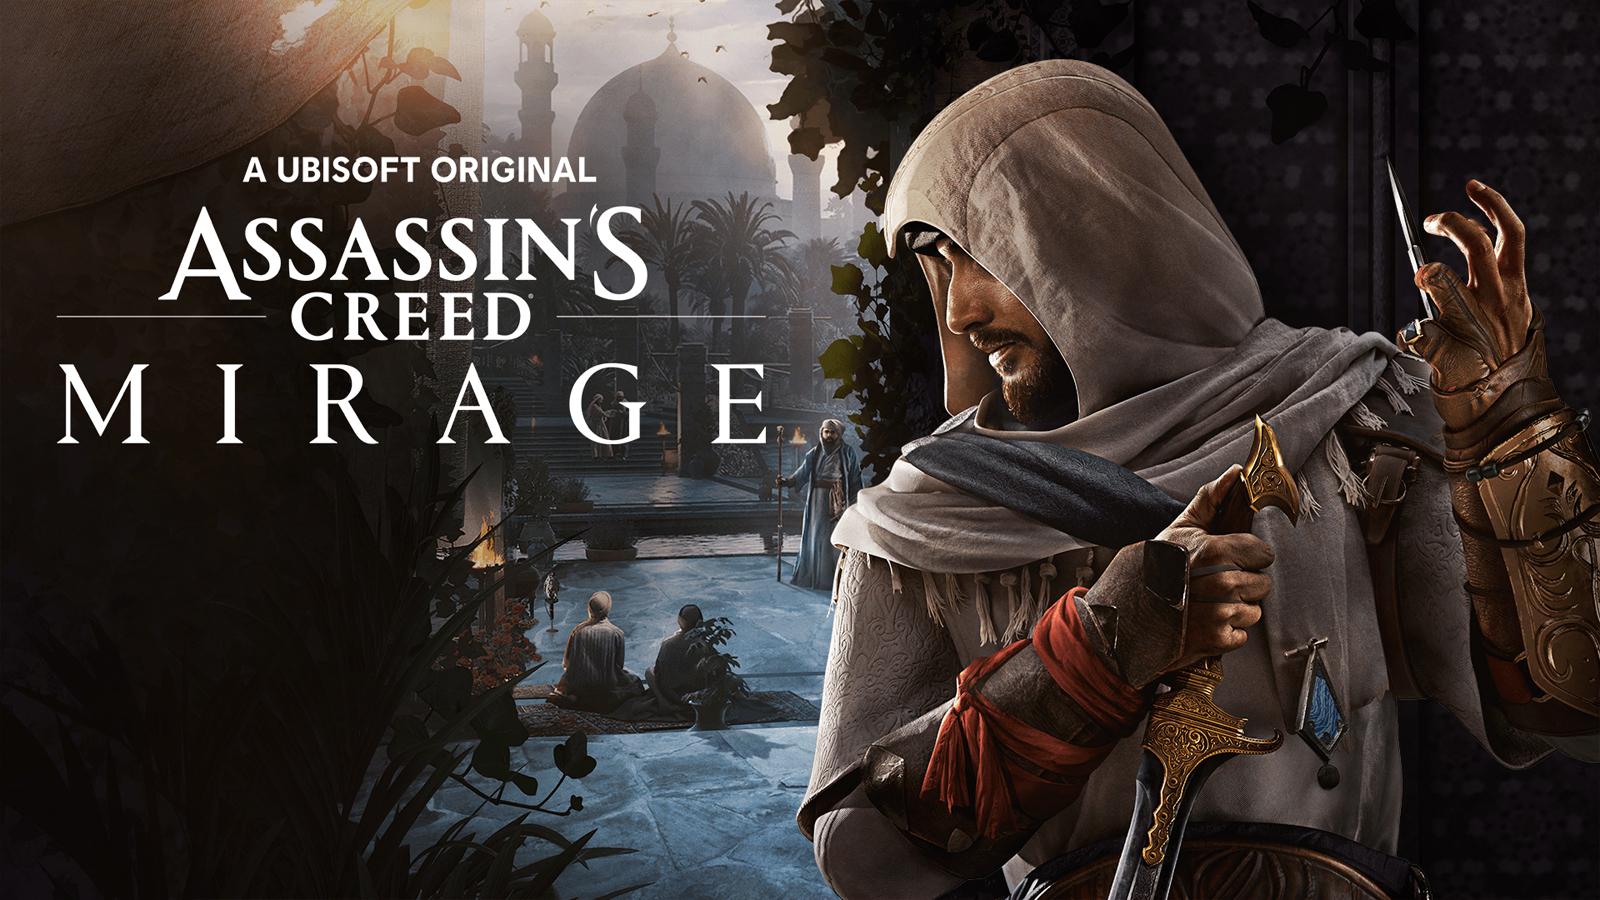 An image of Assassins Creed Mirage